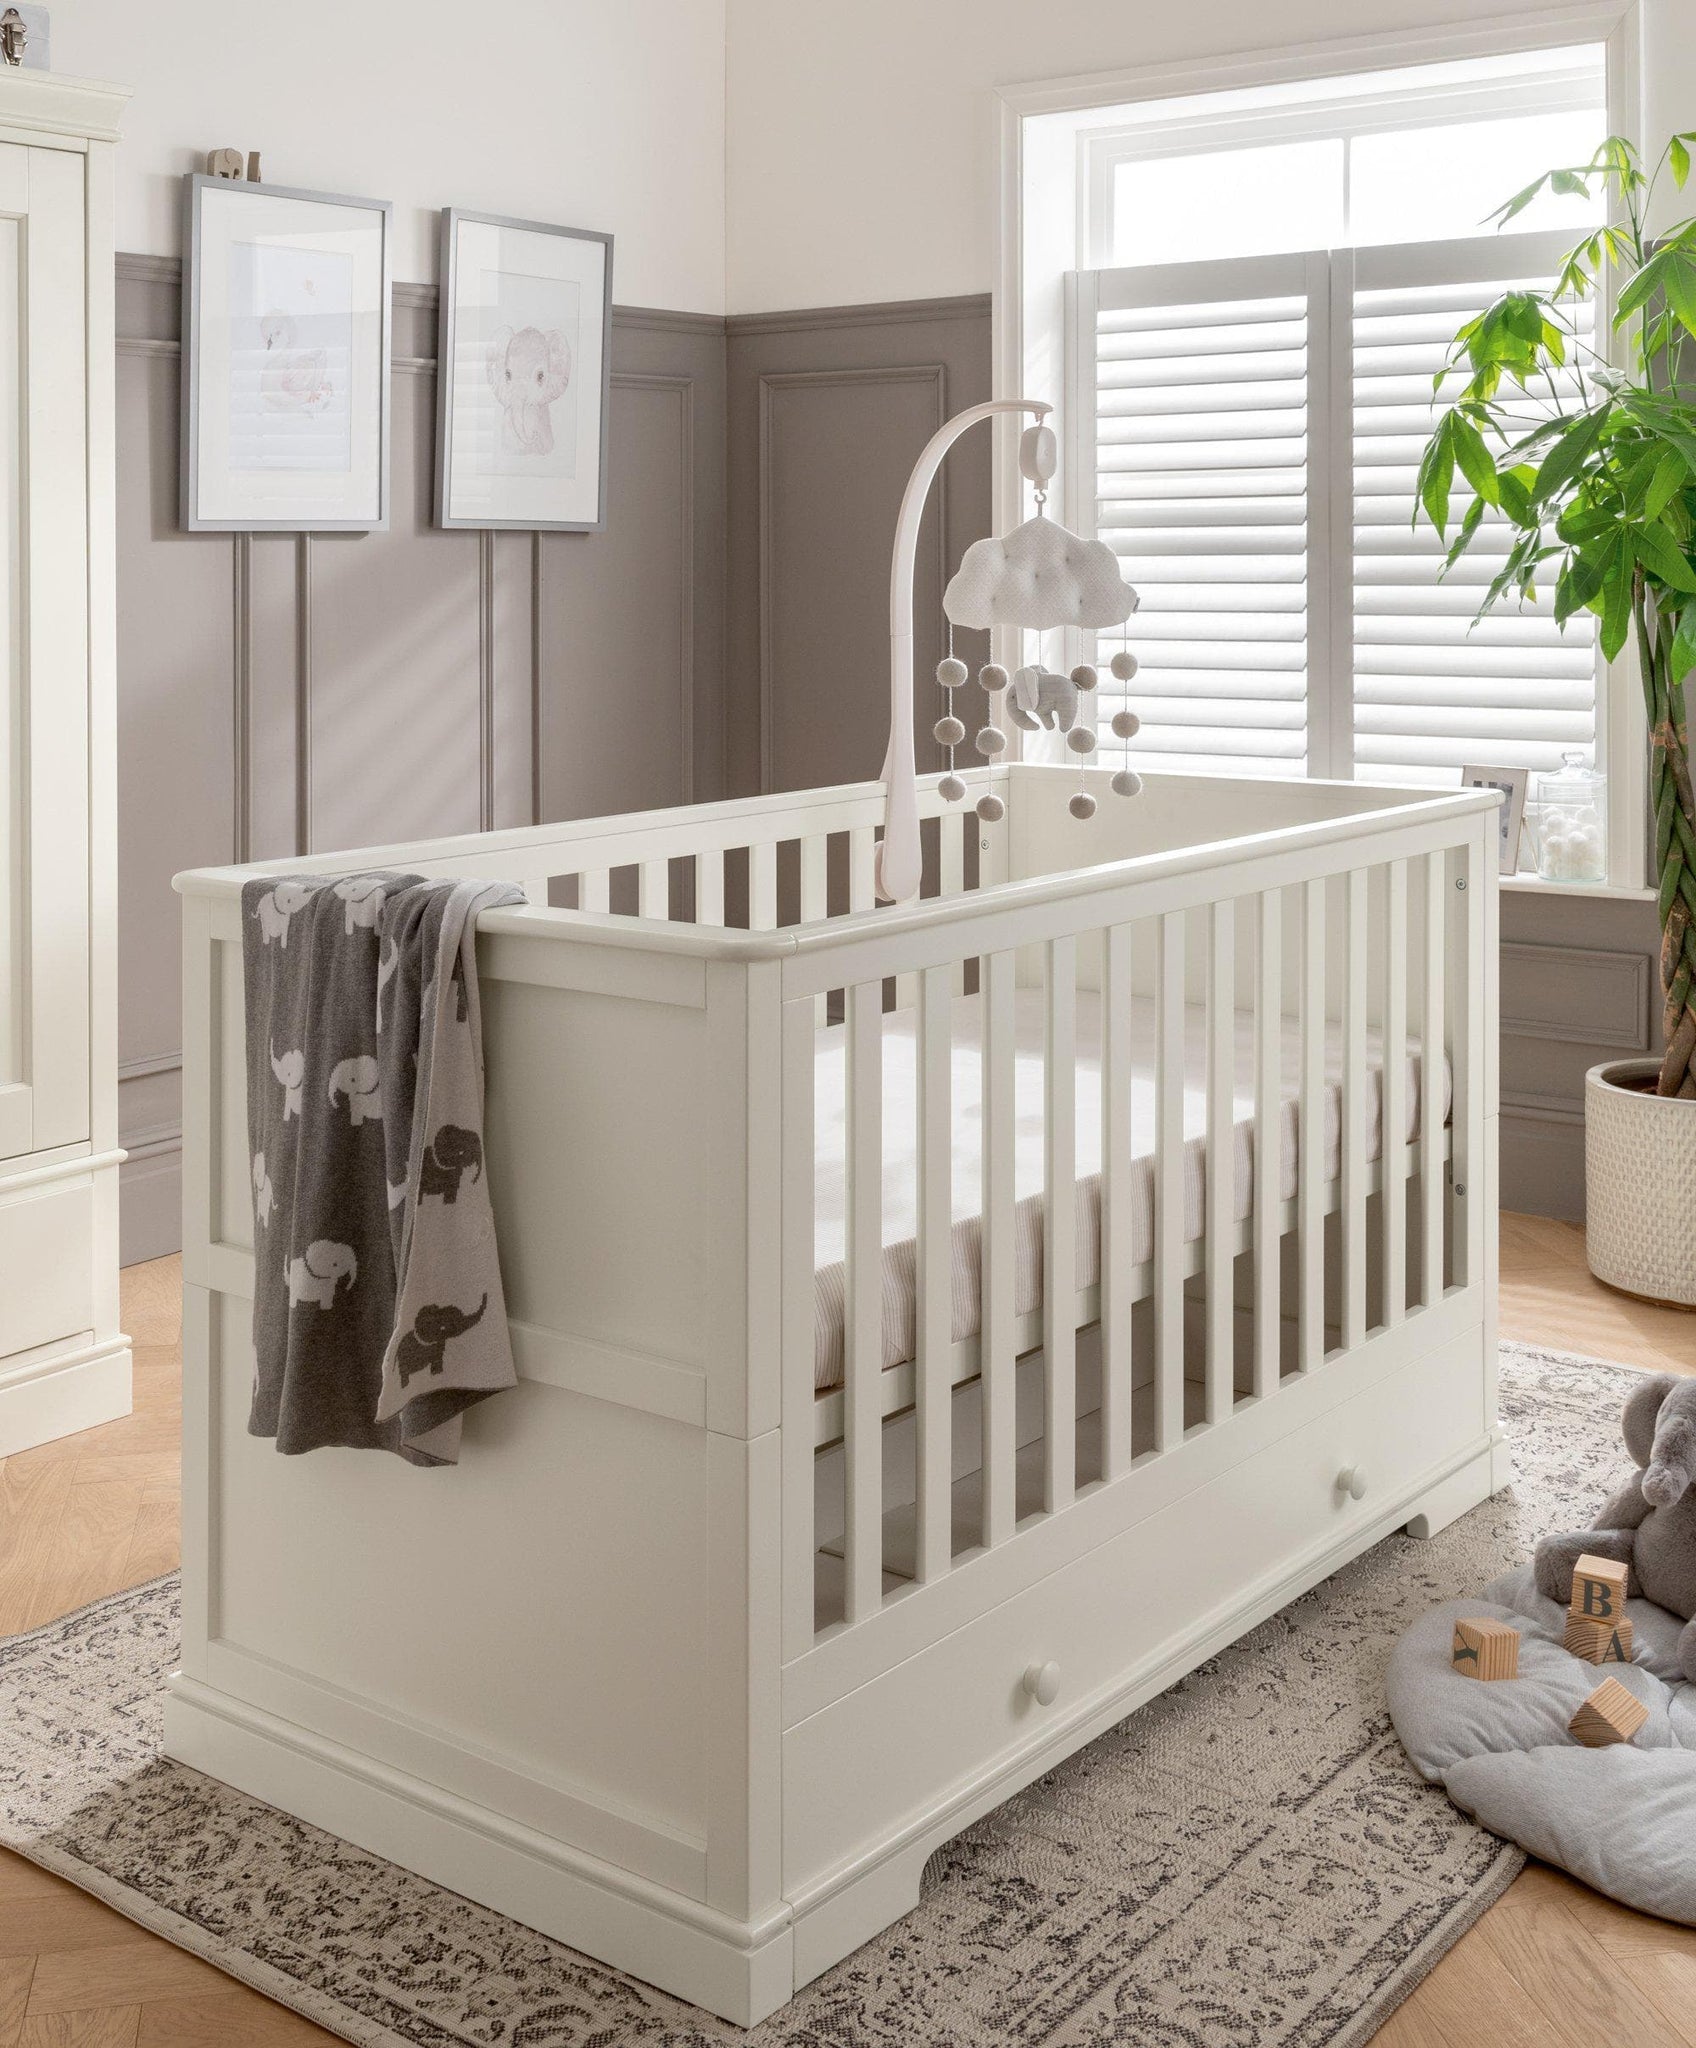 Baby Cots, Cot Beds, Mattresses, Nursery Furniture – Love For Sleep